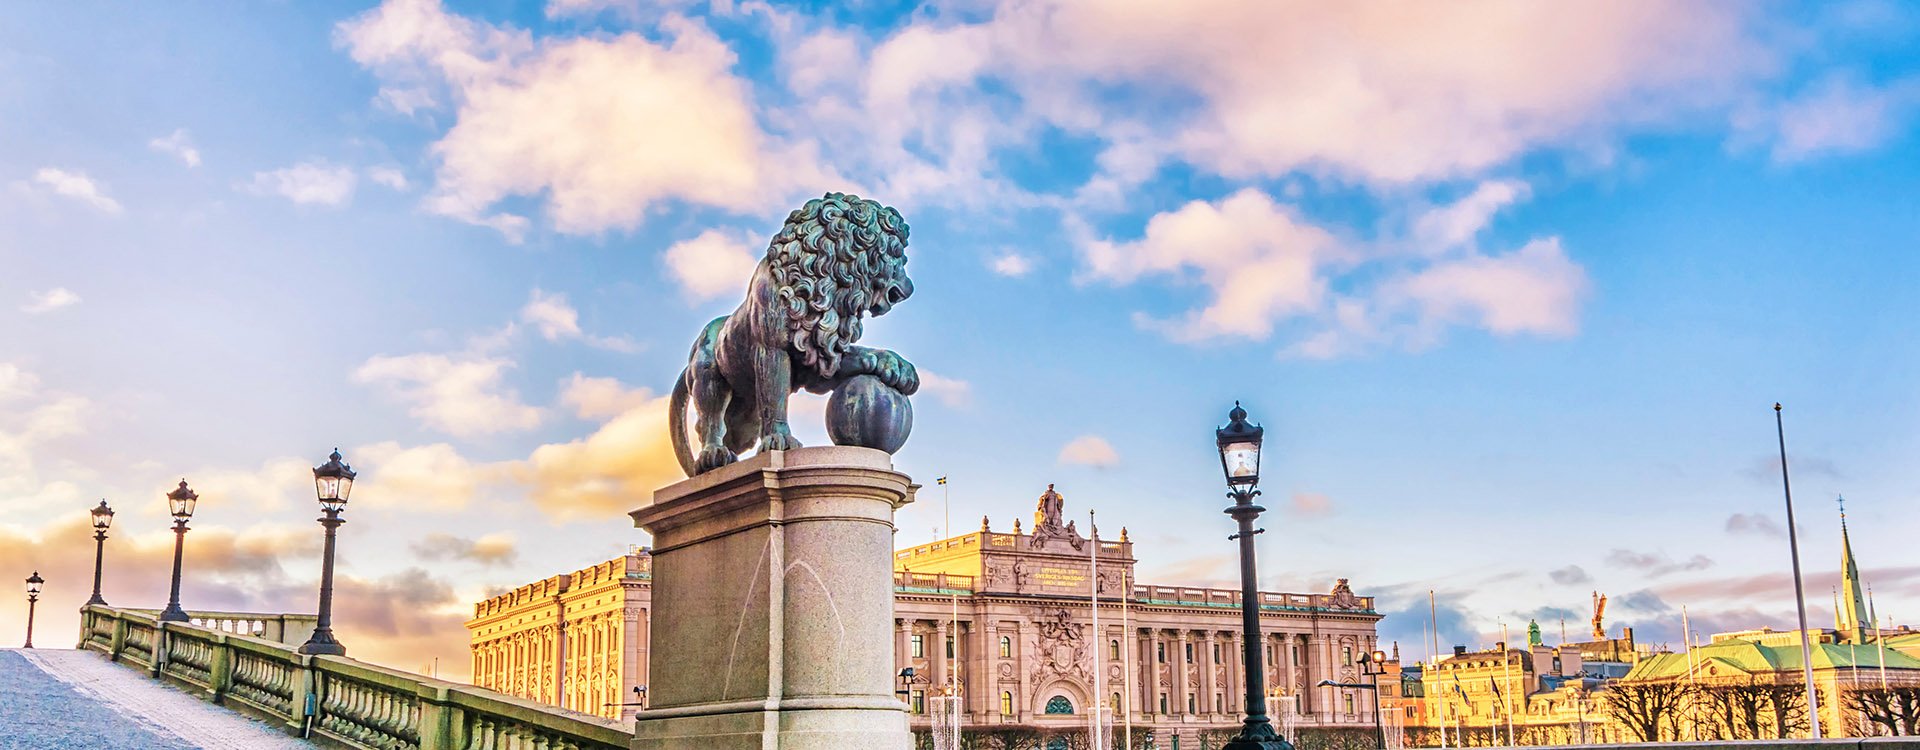 Sculptures of lions near the main staircase of the Royal Palace of Stockholm and a view of the Parliament Building (Riksdagshuset) in Stockholm, the capital of Sweden